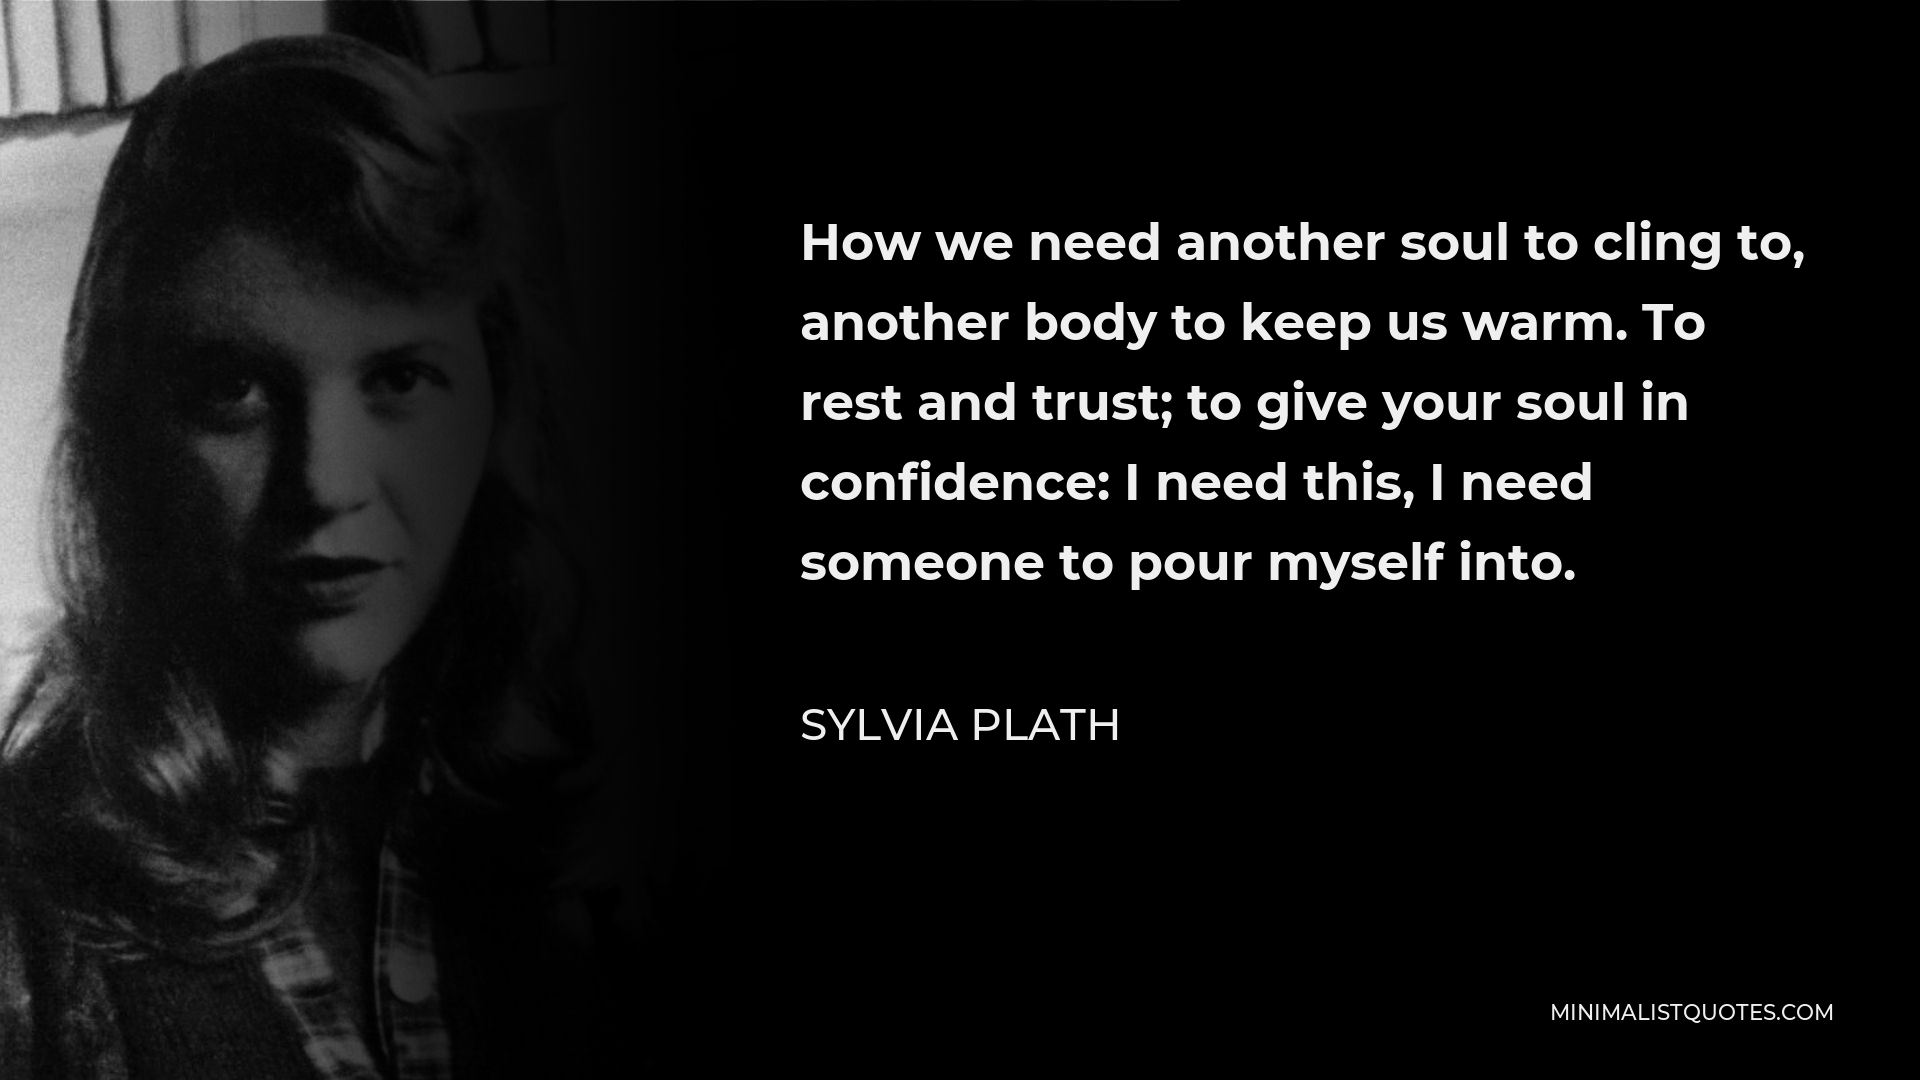 Sylvia Plath Quote - How we need another soul to cling to, another body to keep us warm. To rest and trust; to give your soul in confidence: I need this, I need someone to pour myself into.